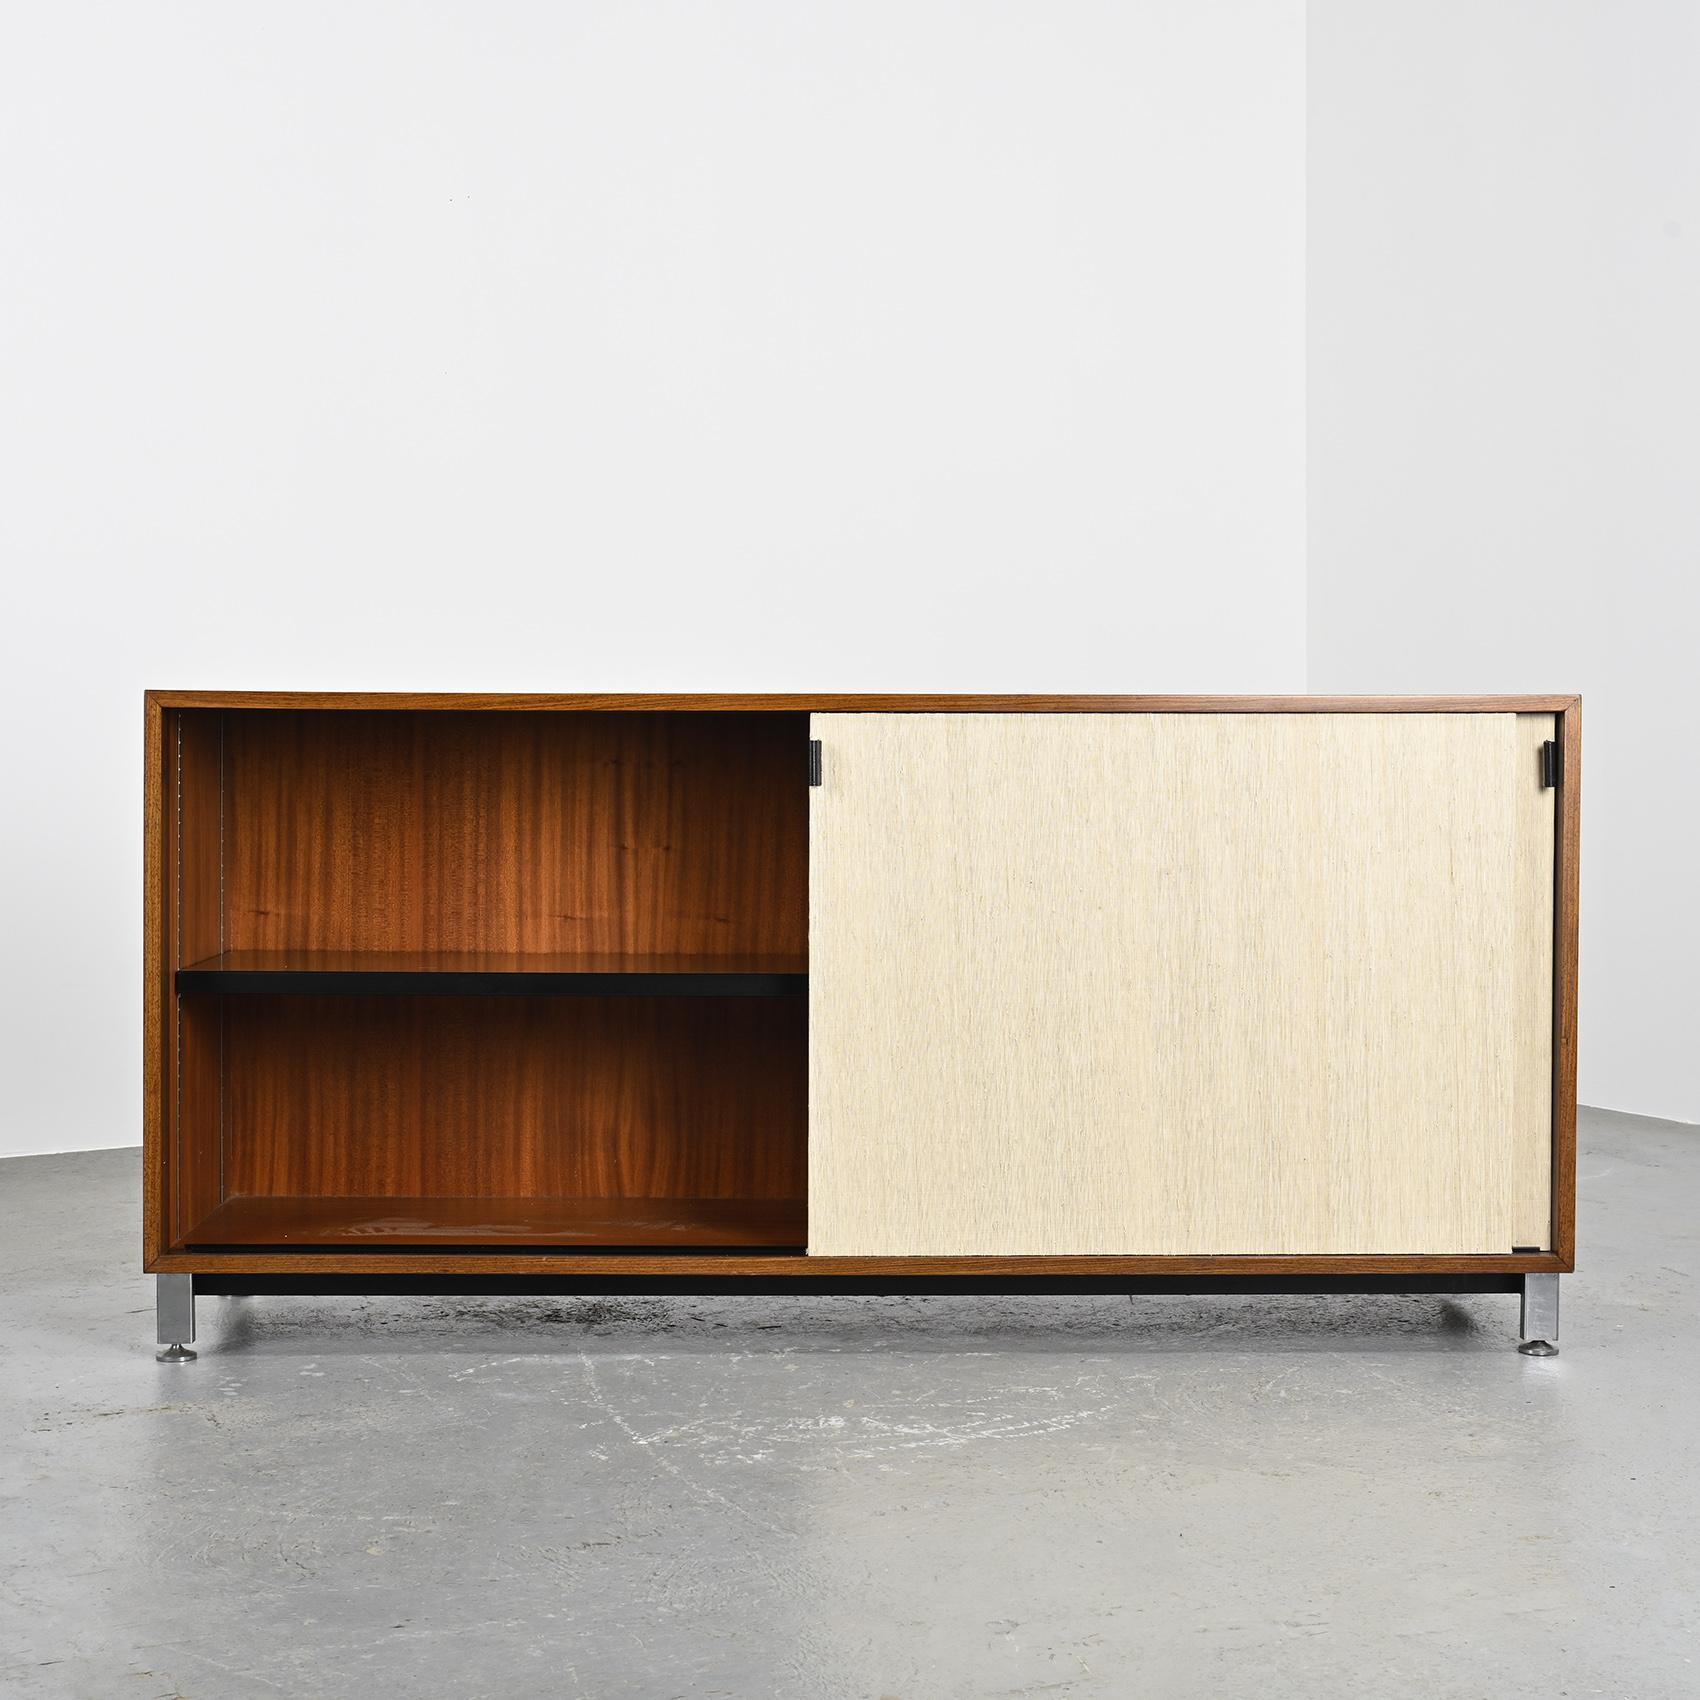 Iconic design by Florence Knoll, this sideboard has been restored with its raffia-covered doors for a natural and bohemian spirit.

The rectangular structure is made of rosewood veneer and opens with two sliding doors with fawn leather handles and